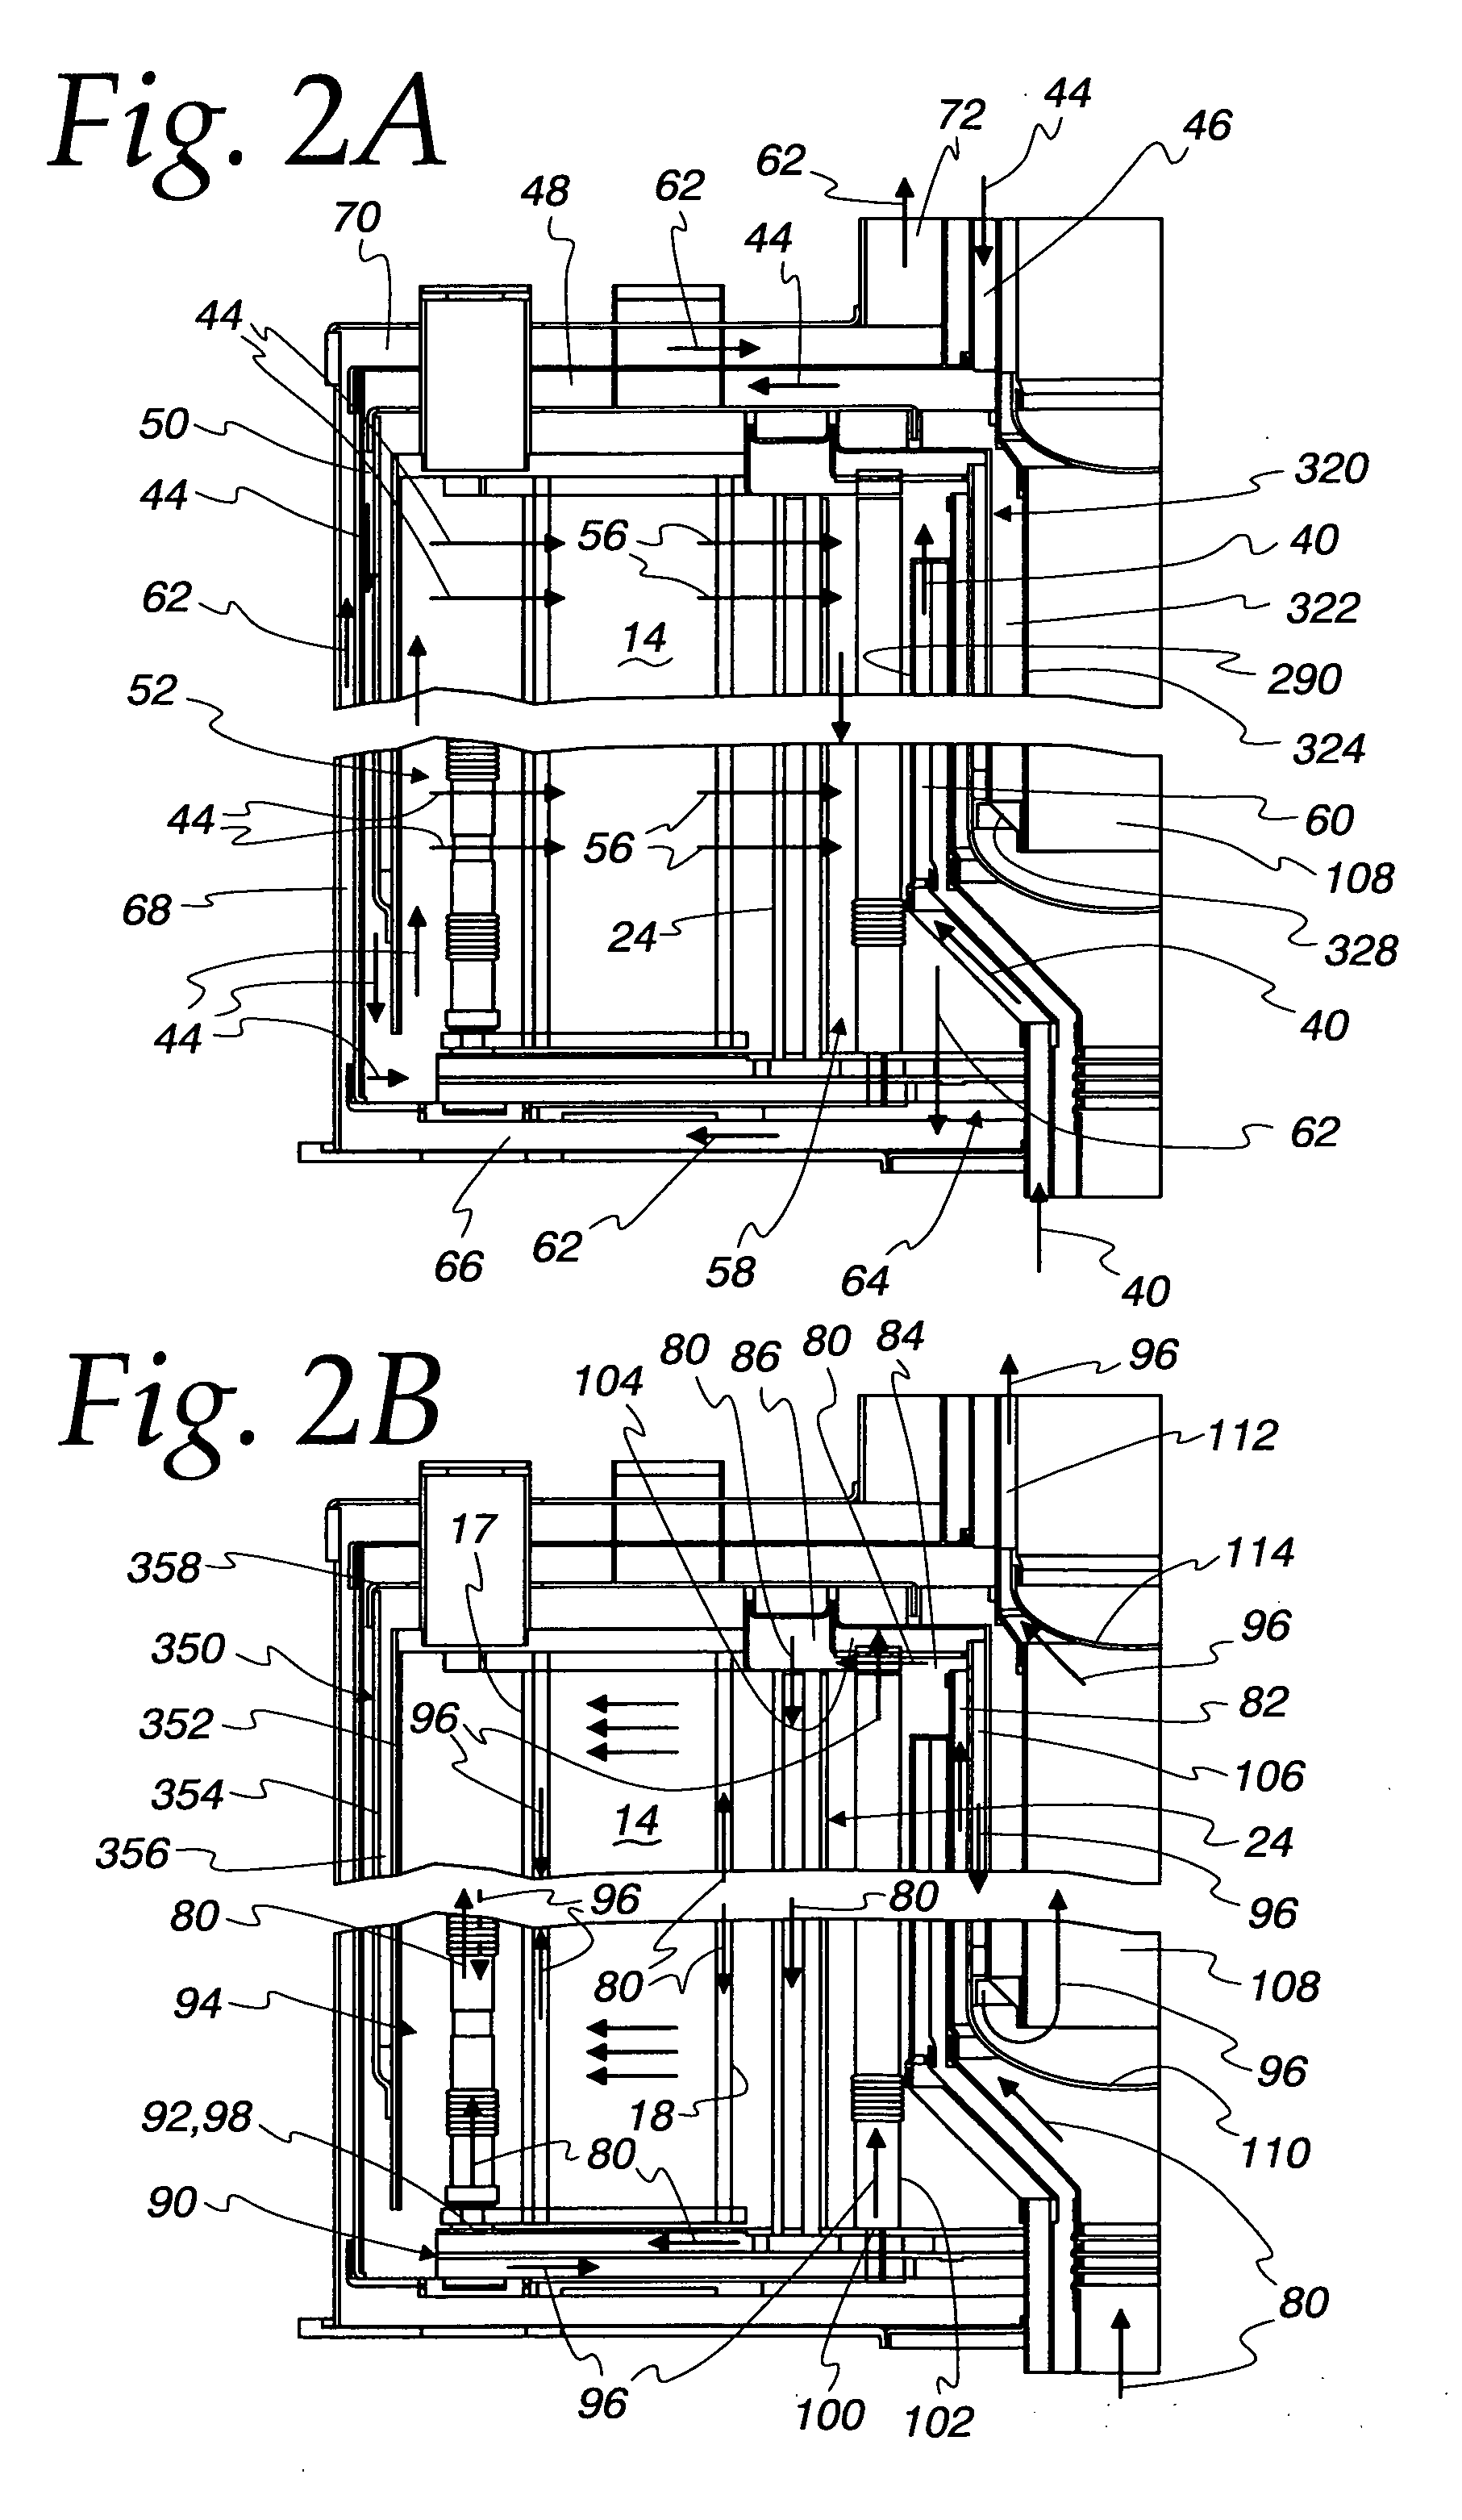 Integrated solid oxide fuel cell and fuel processor